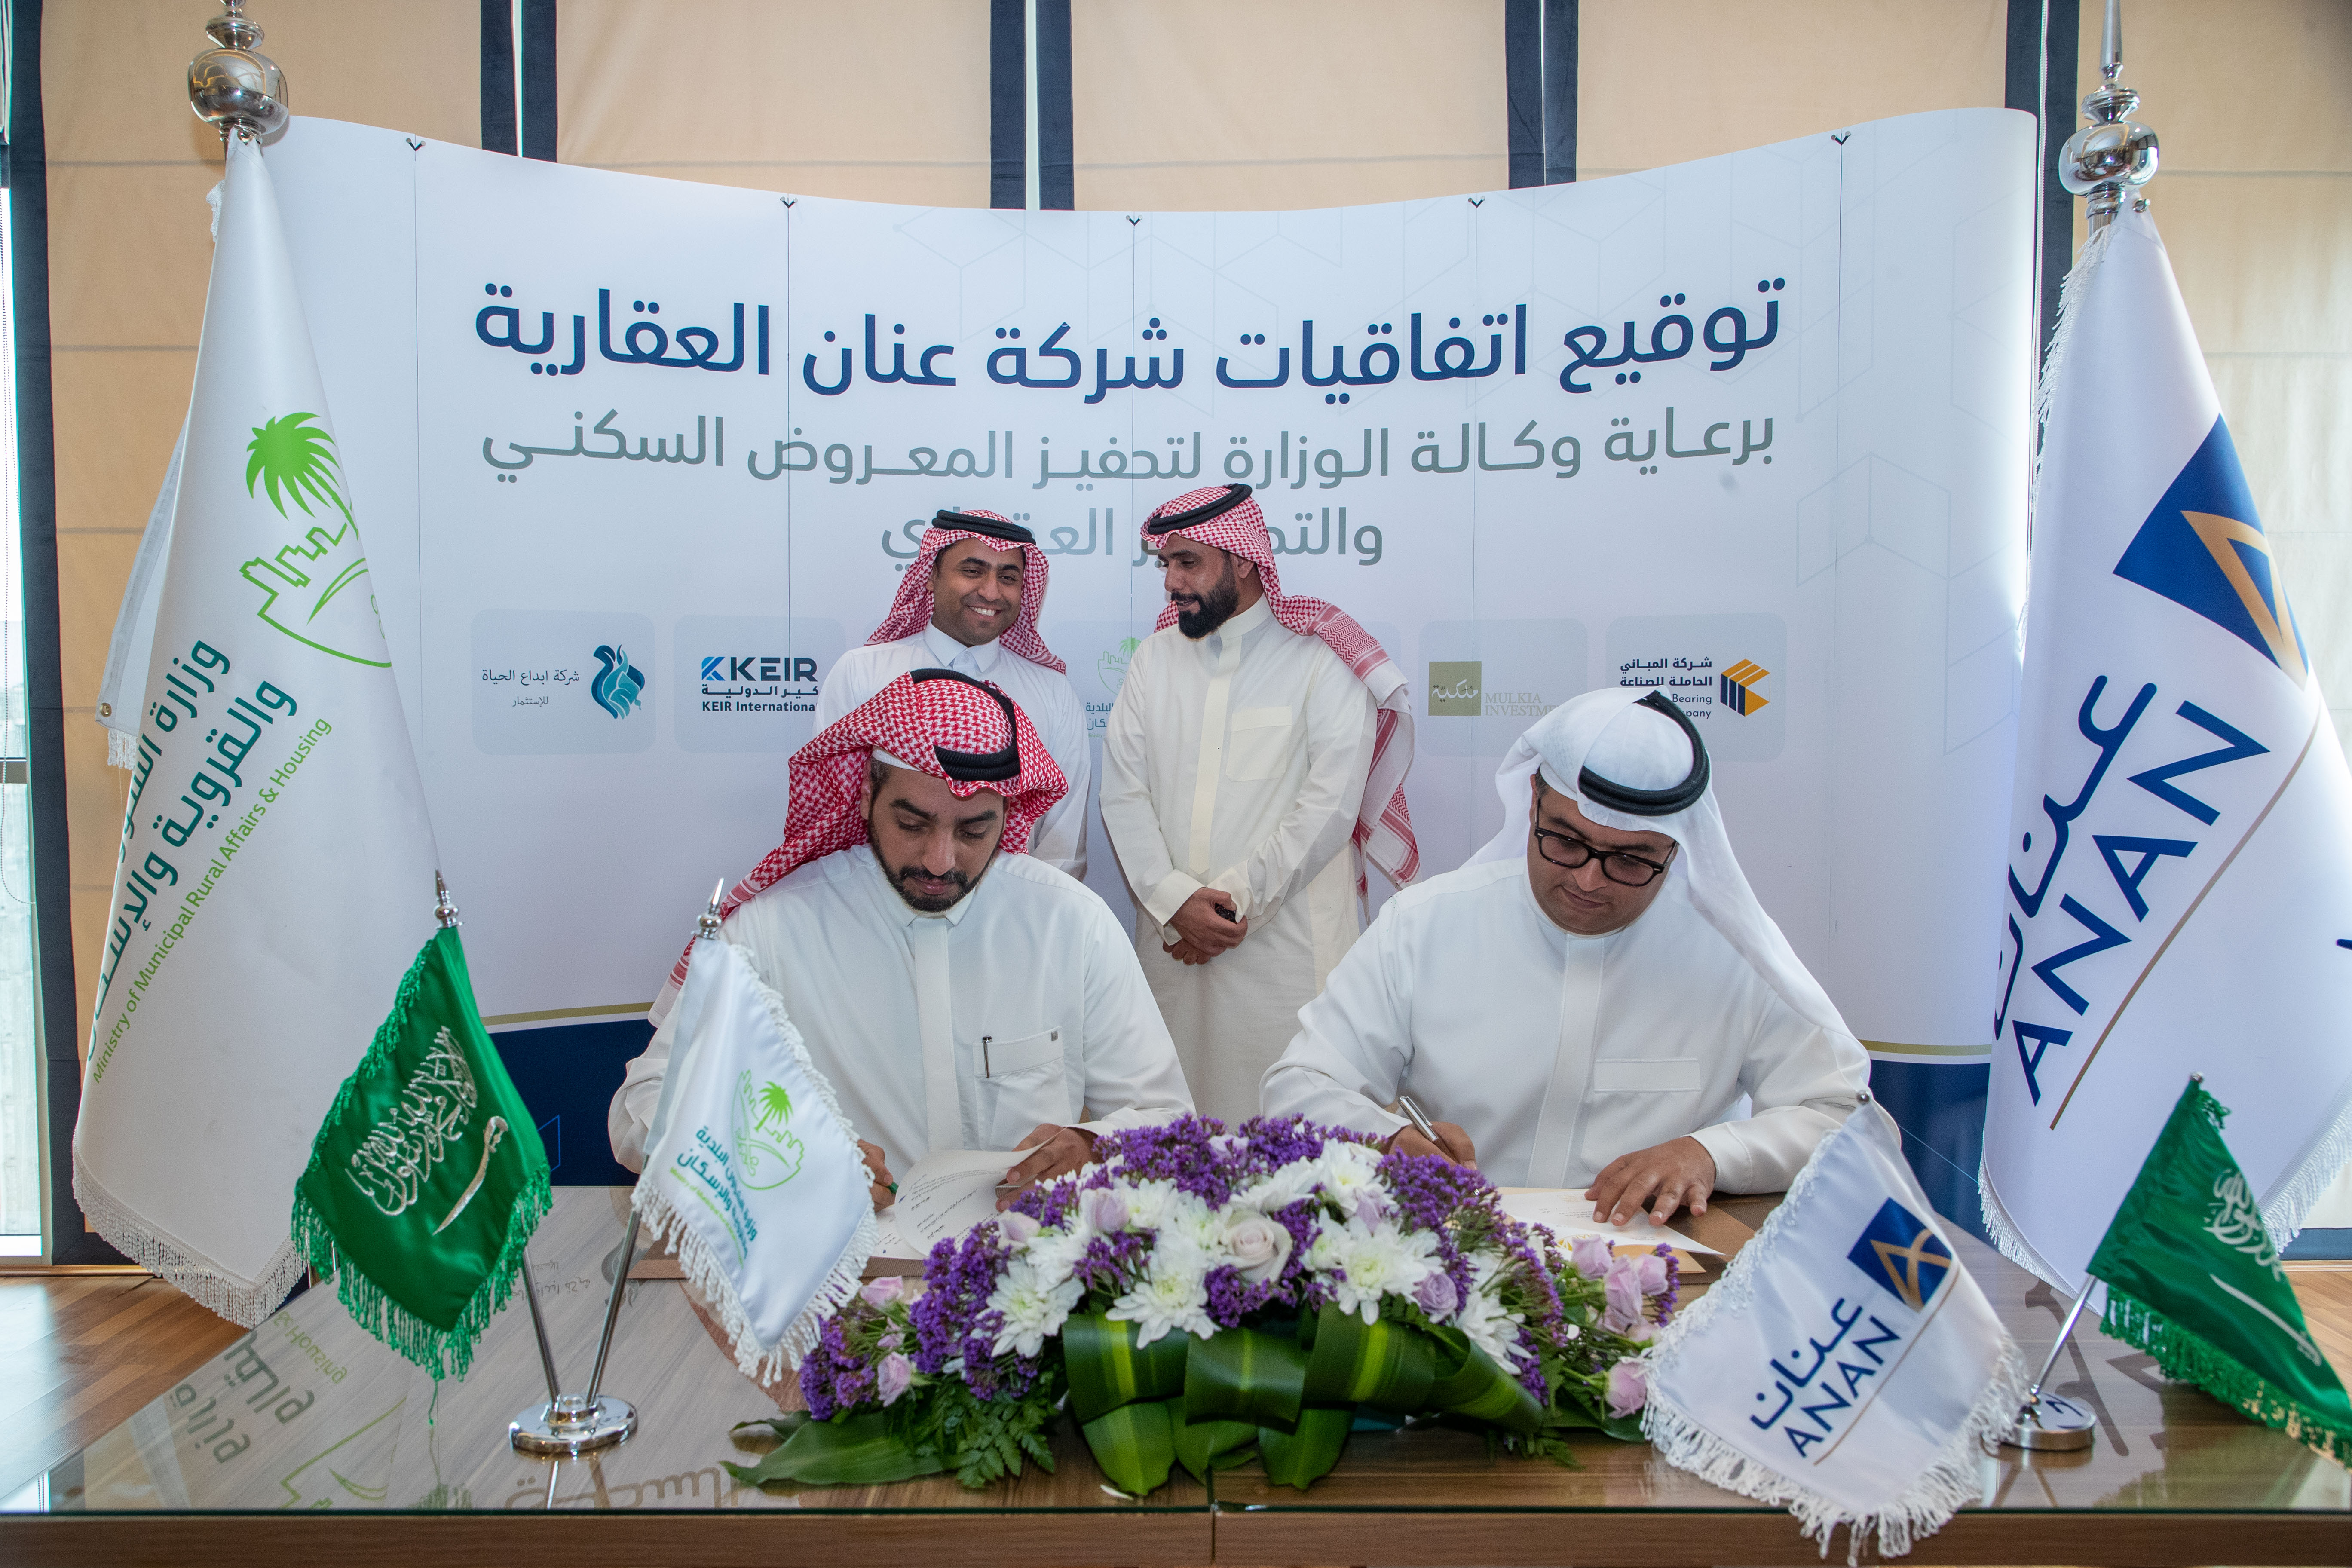 Signing 5 agreements to develop 4 shemes and build 6,265 housing units in “Makkah and Al-Qassim”